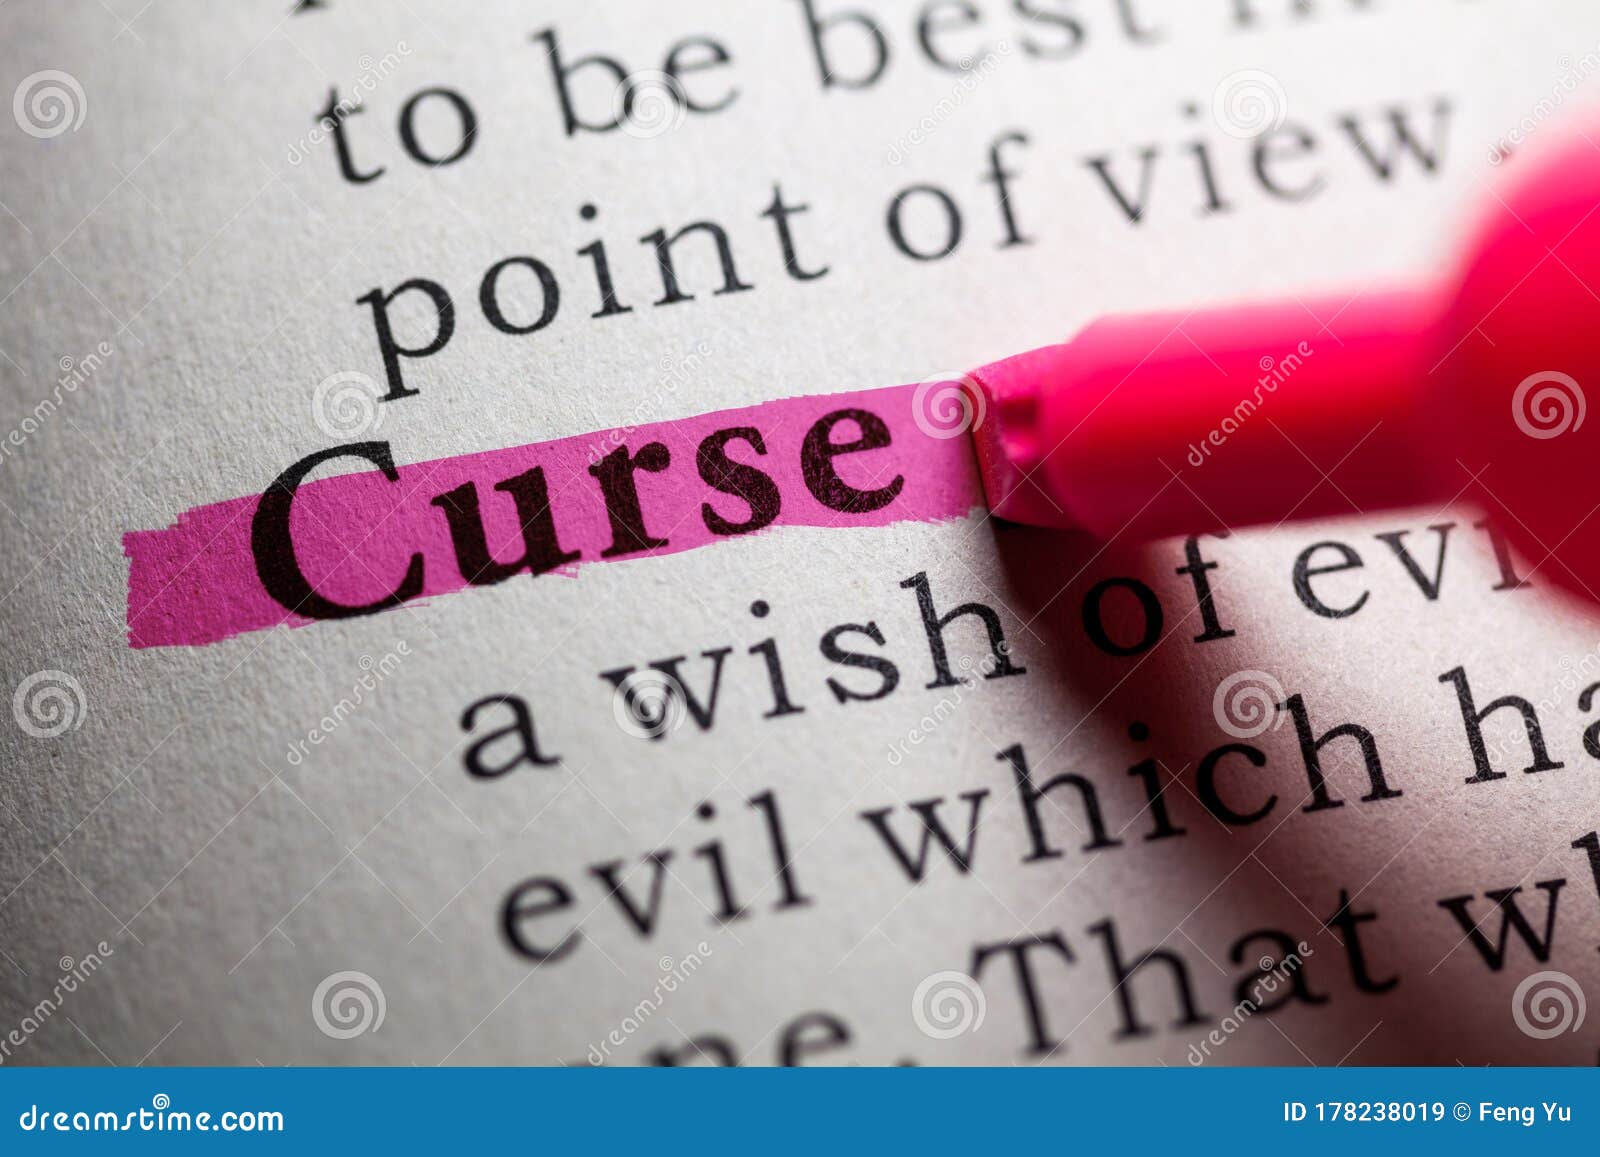 Cursed definition  Cursed meaning - words to describe someone